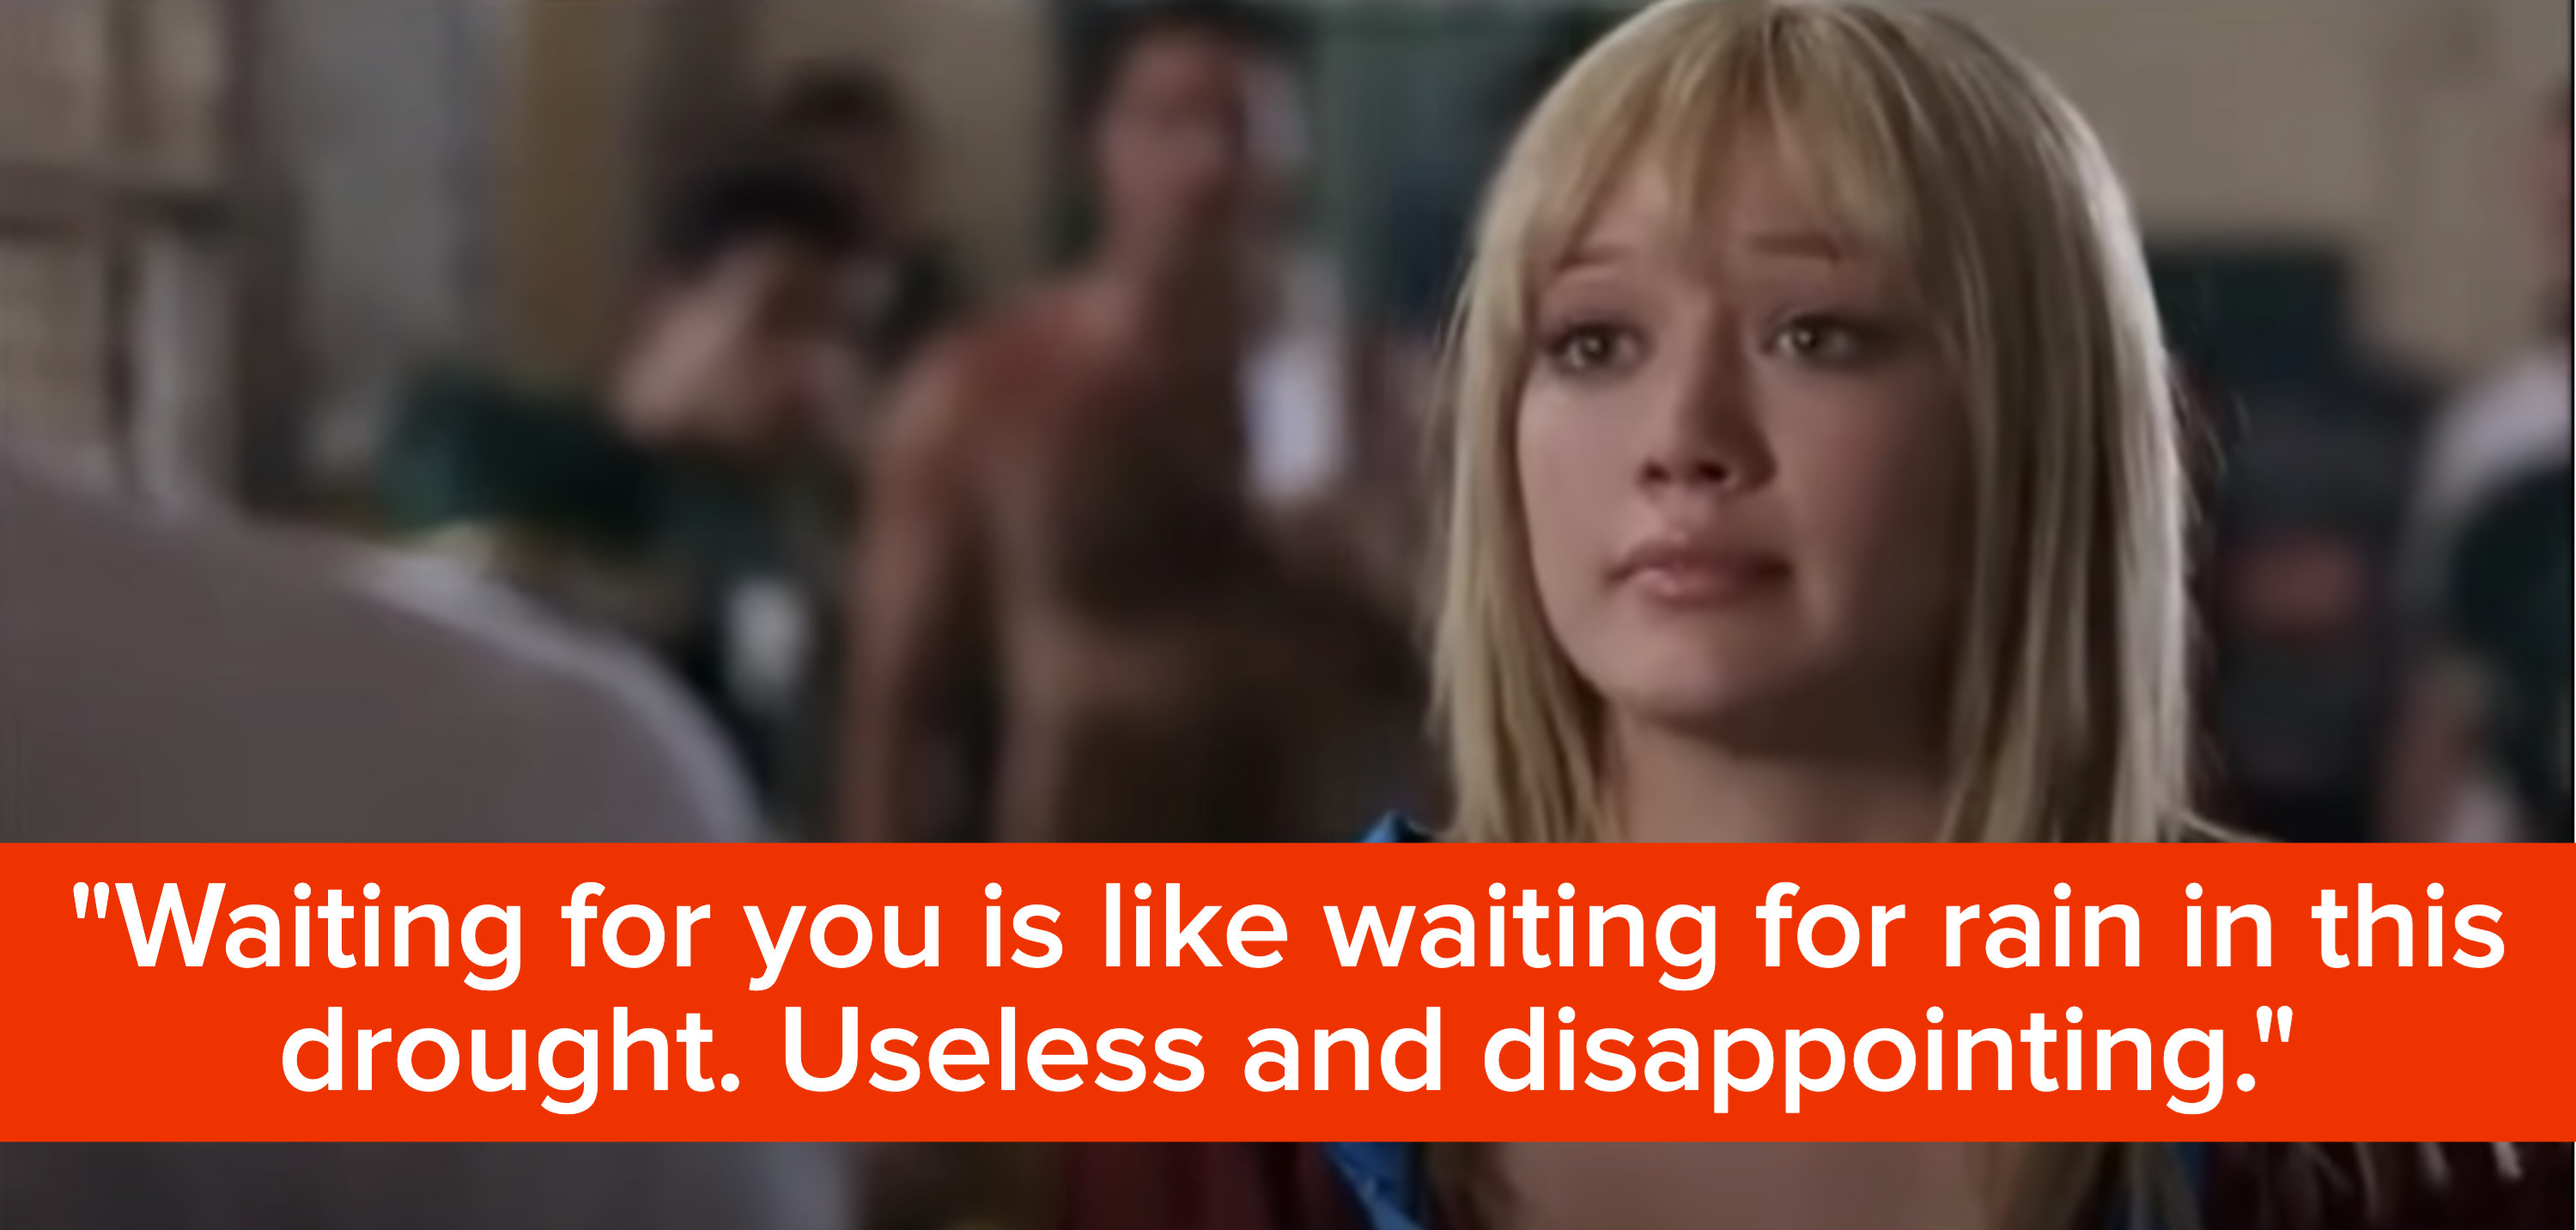 Hillary Duff says &quot;waiting for you is like waiting for rain in this drought, useless and disappointing&quot;